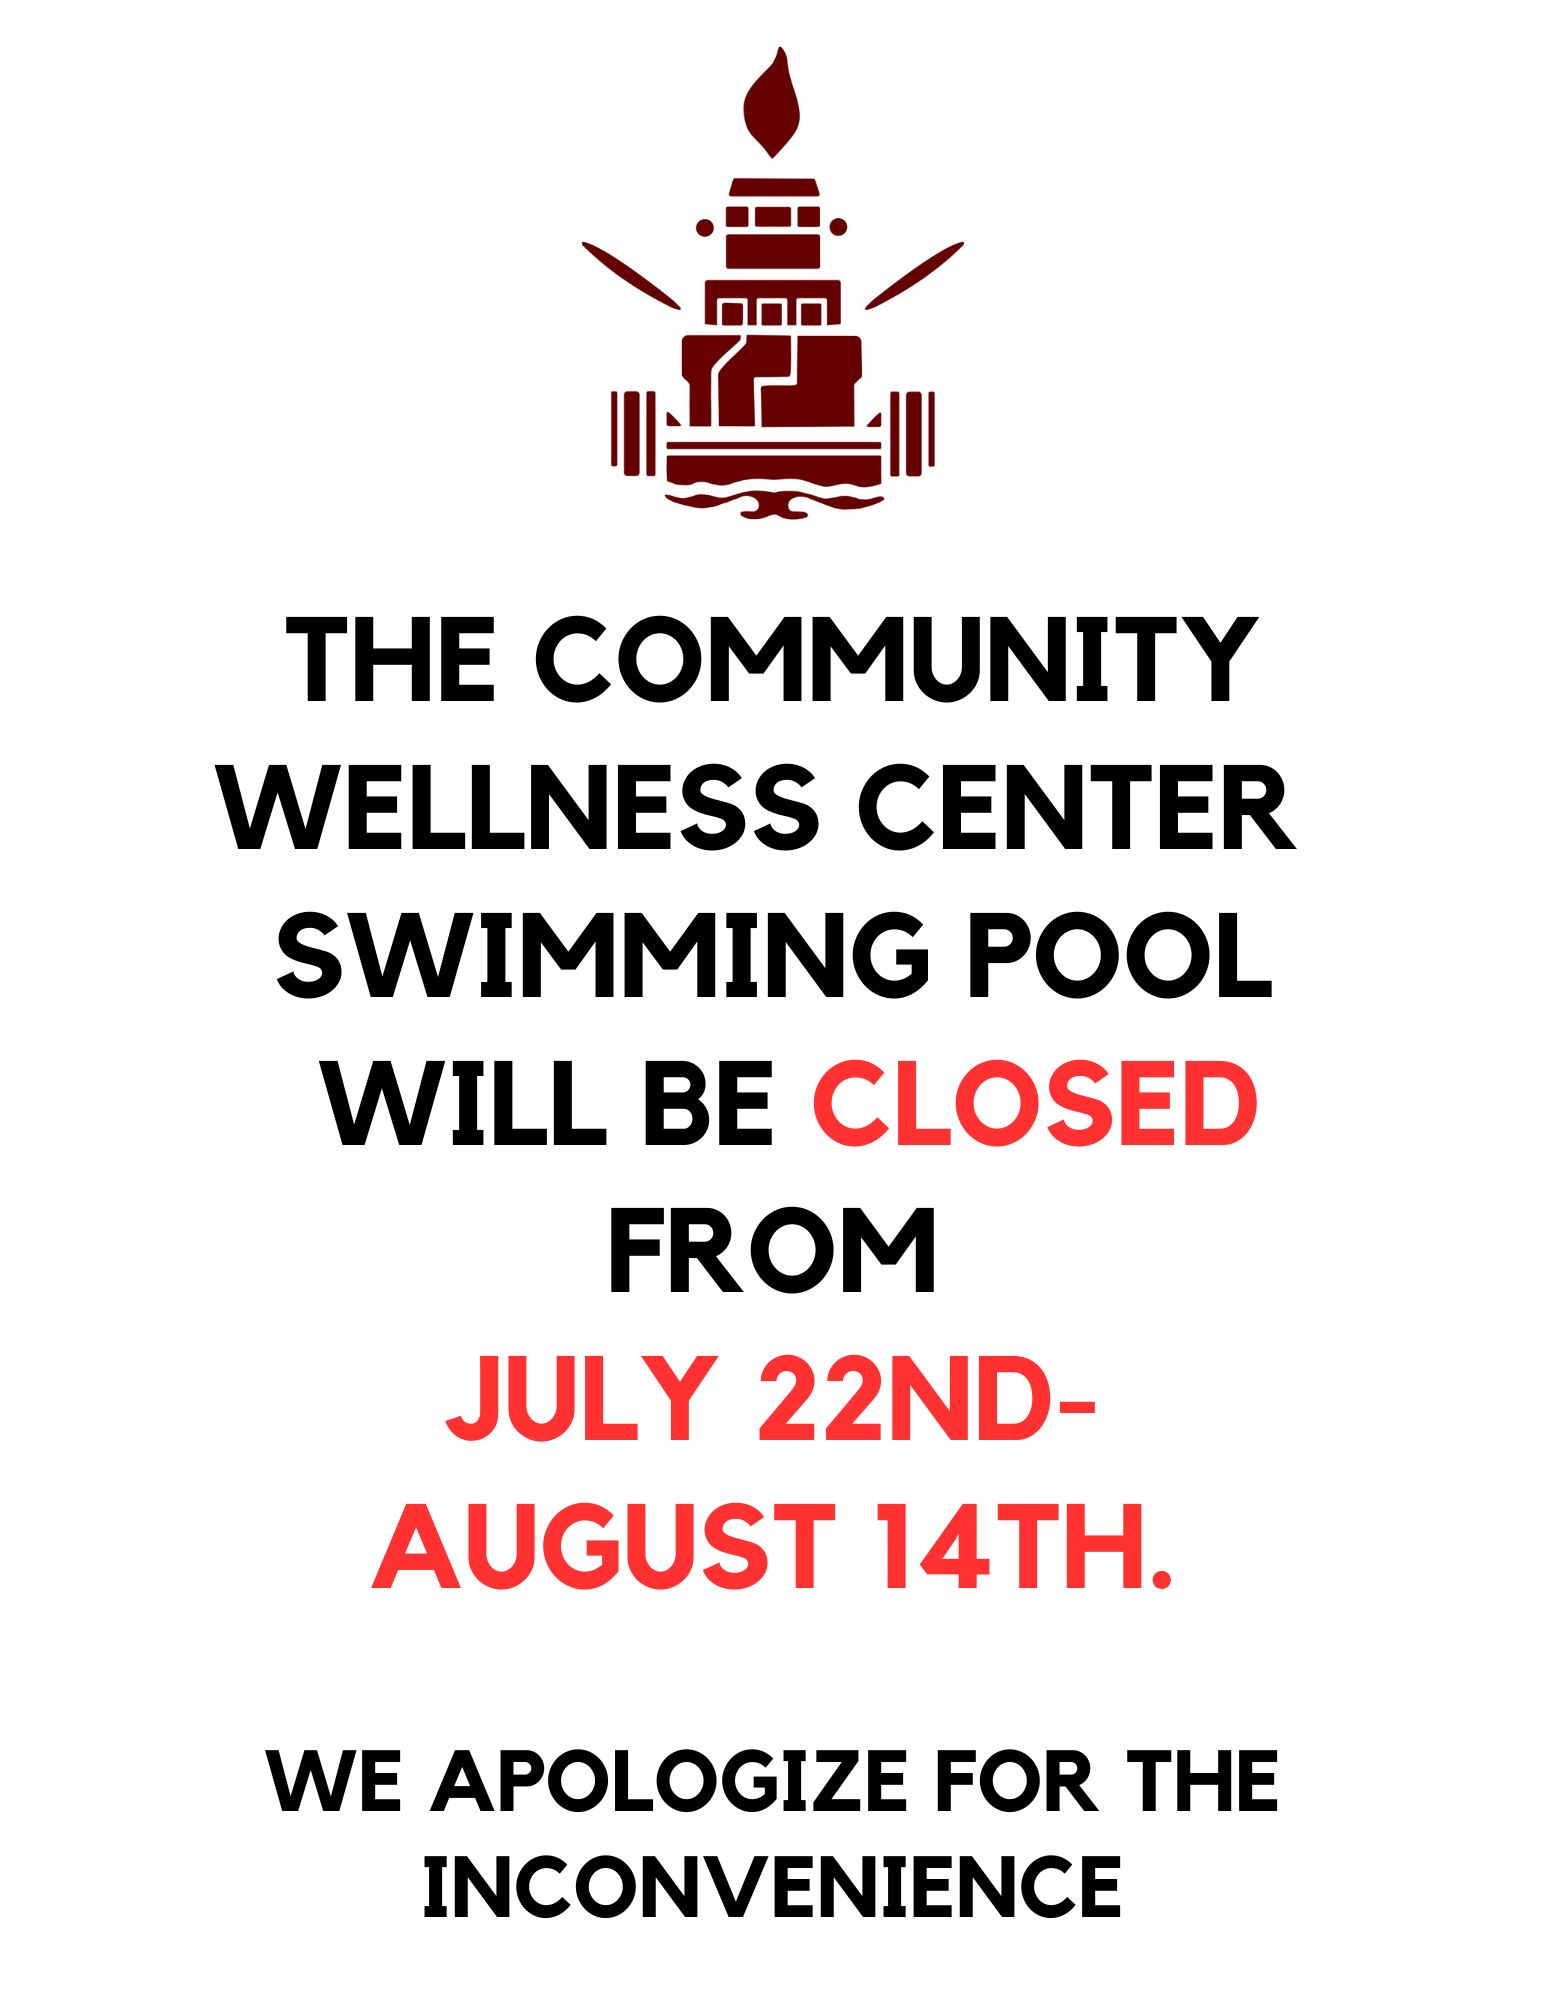 Pool will be closed for maintenance